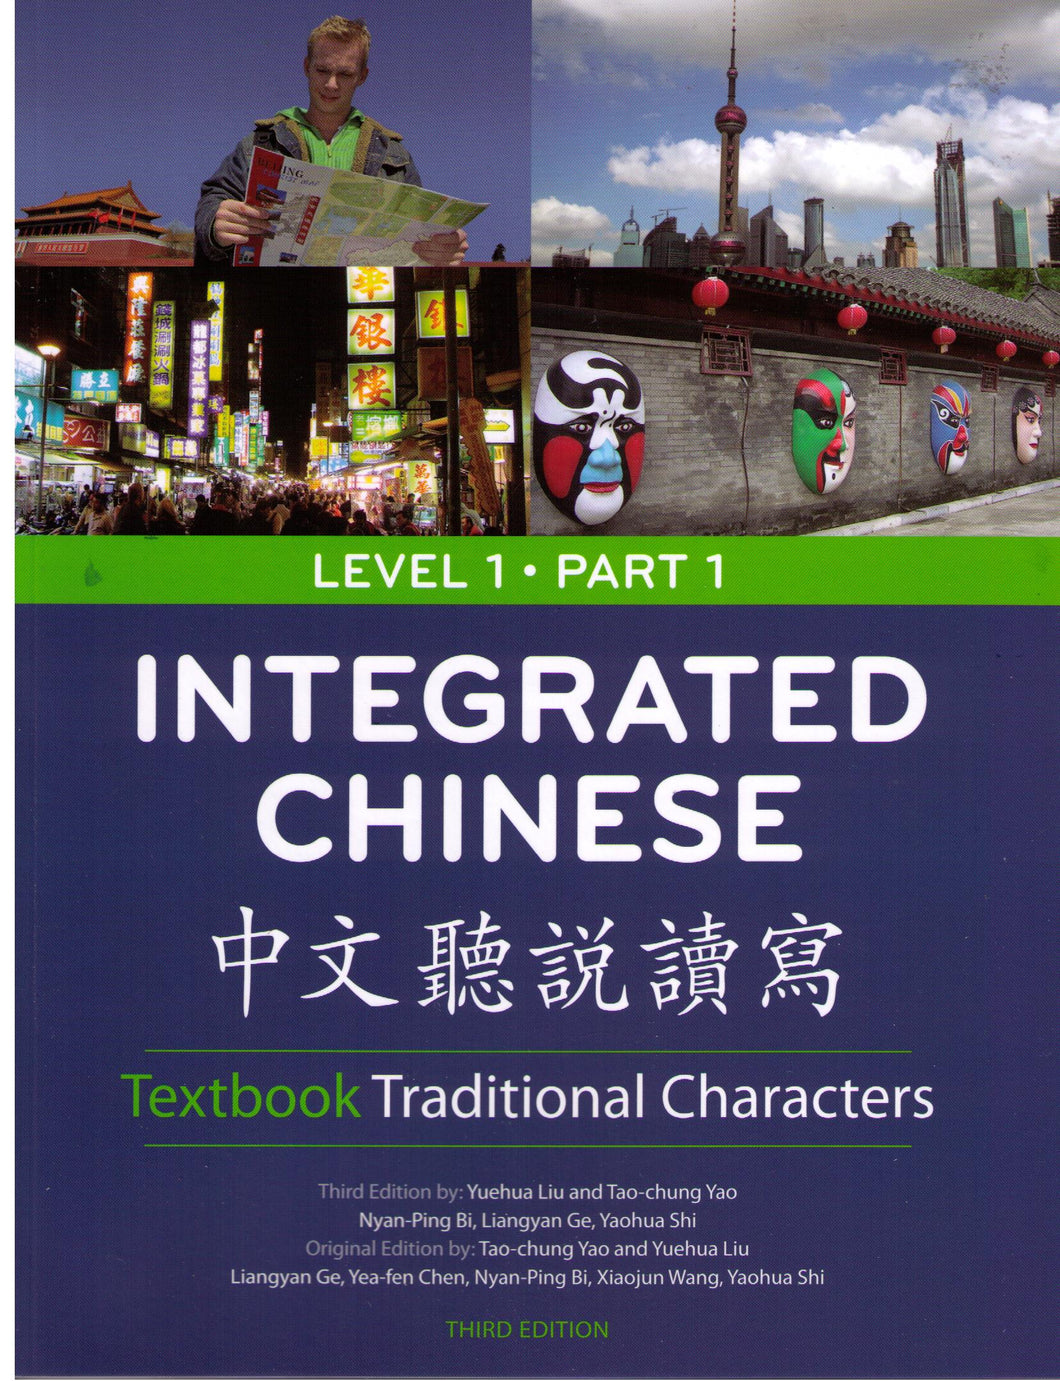 Integrated Chinese Level 1 Part 1-3rd Ed. Textbook-Traditional-Pbk中文聽說讀寫